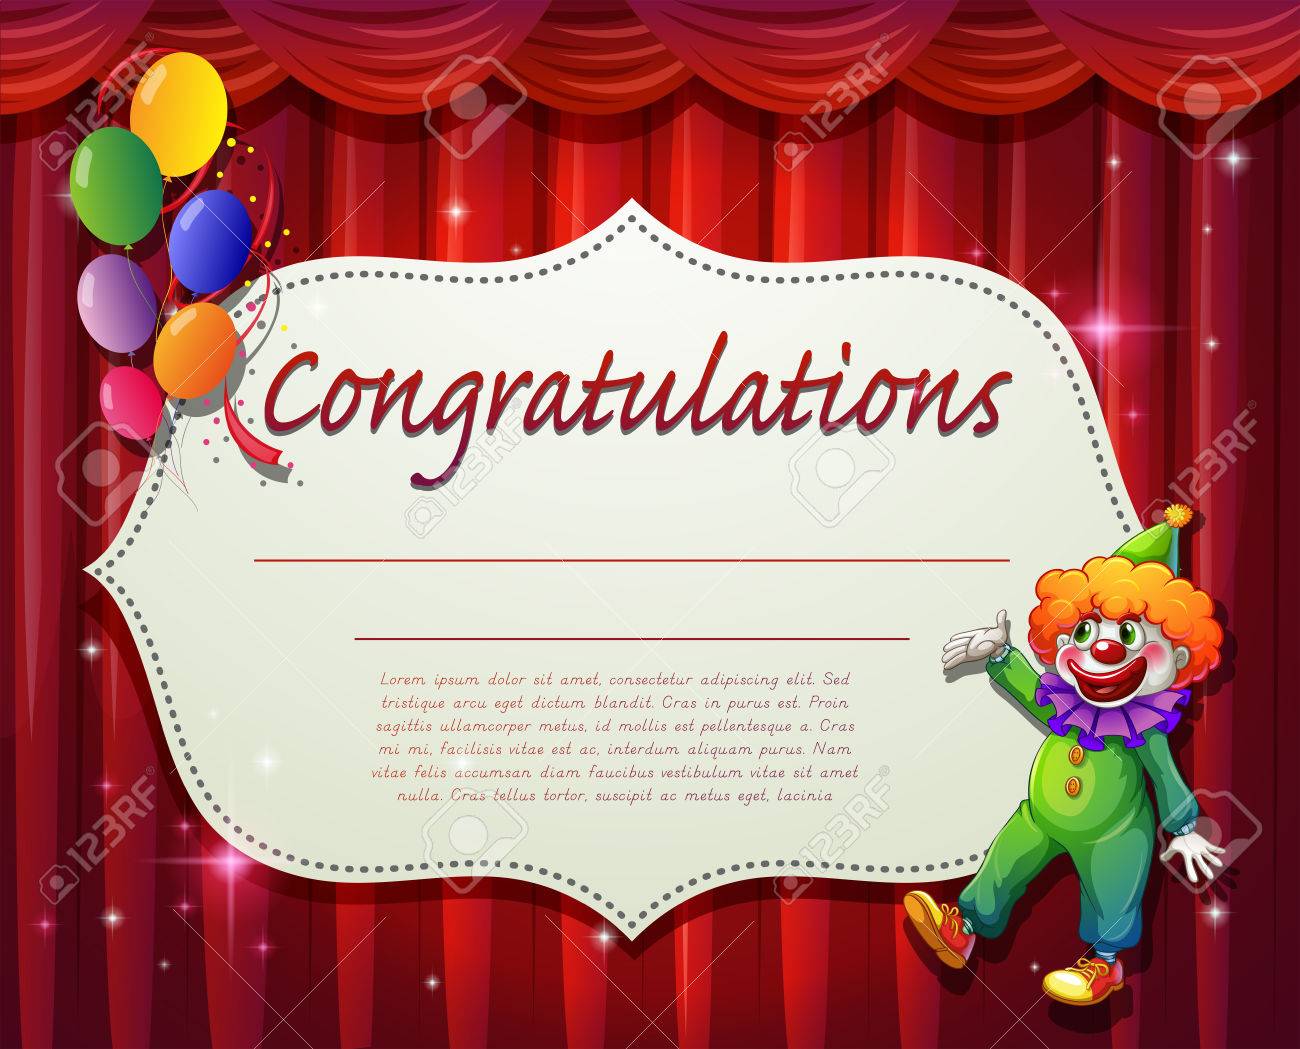 39162872-Certificate-with-clown-and-balloons-background-Stock-Vector.jpg